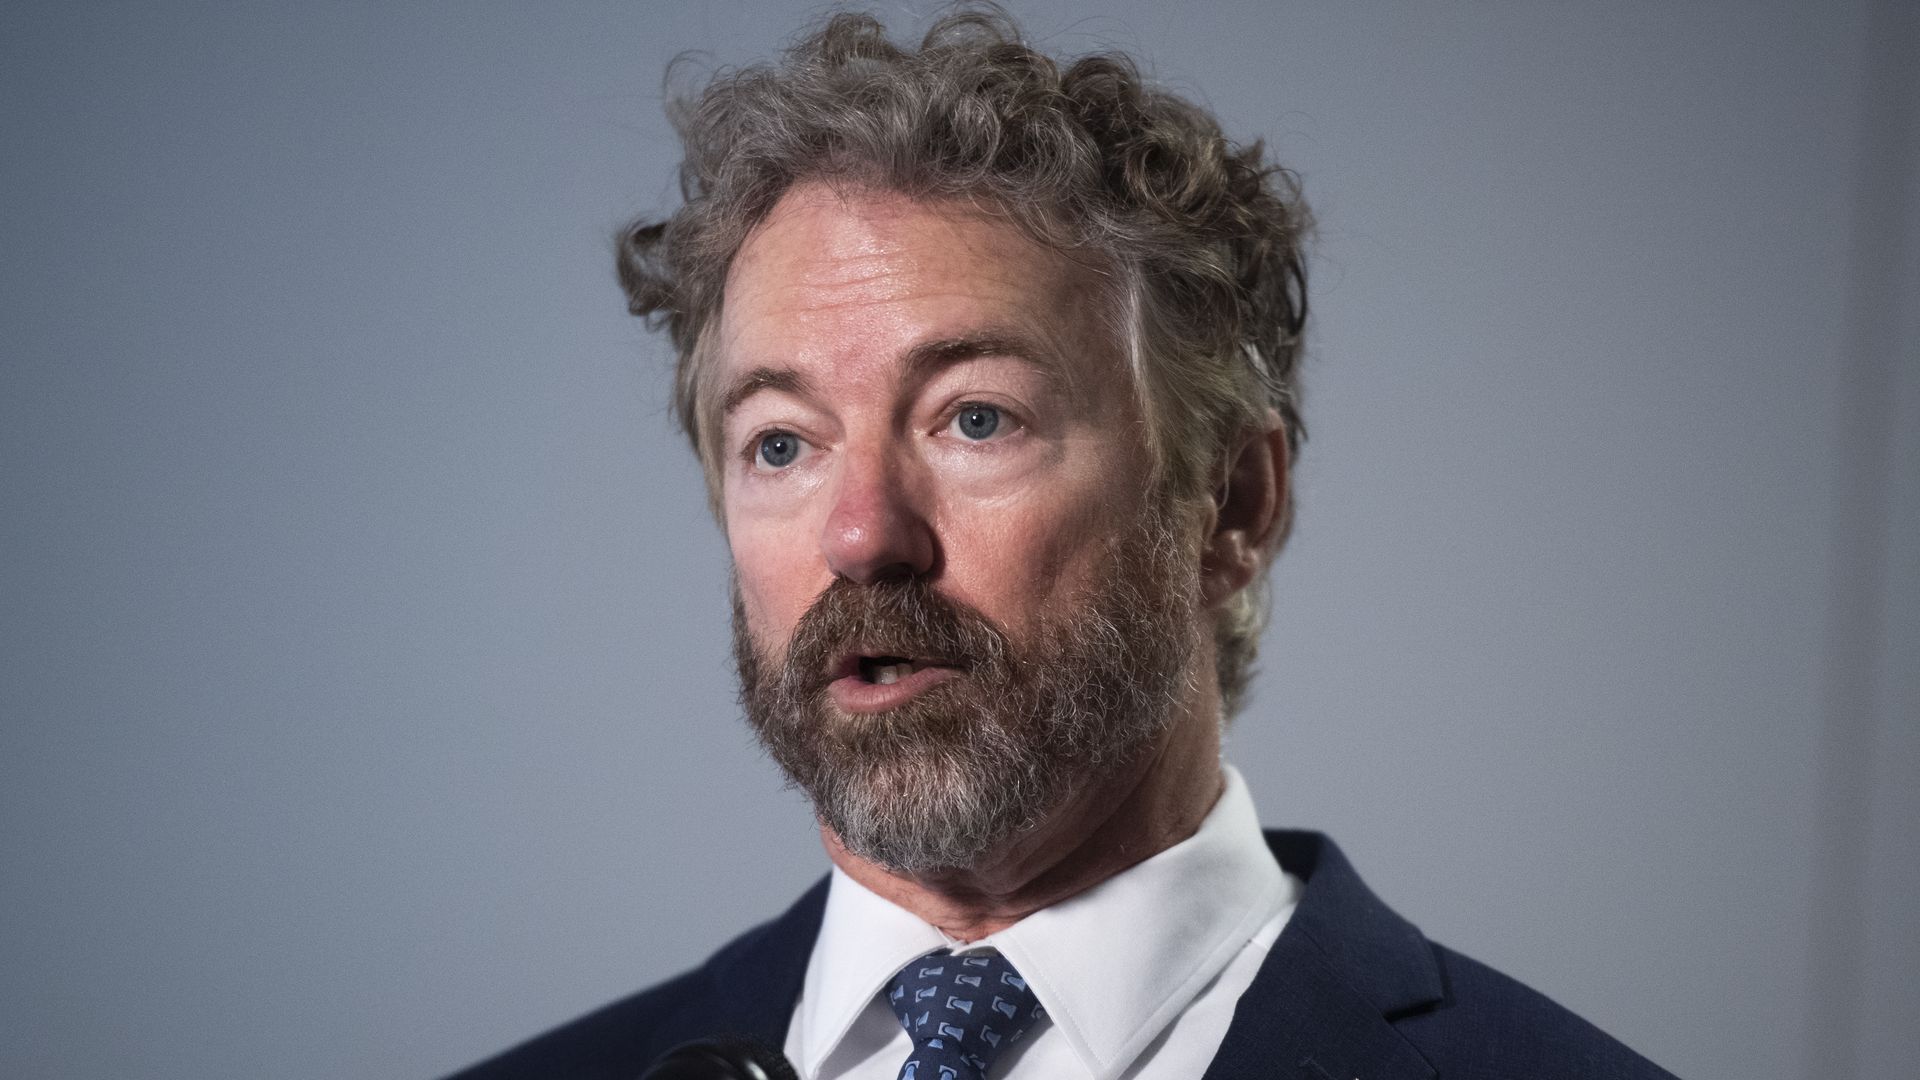 Sen. Rand Paul stands in a suit and tie